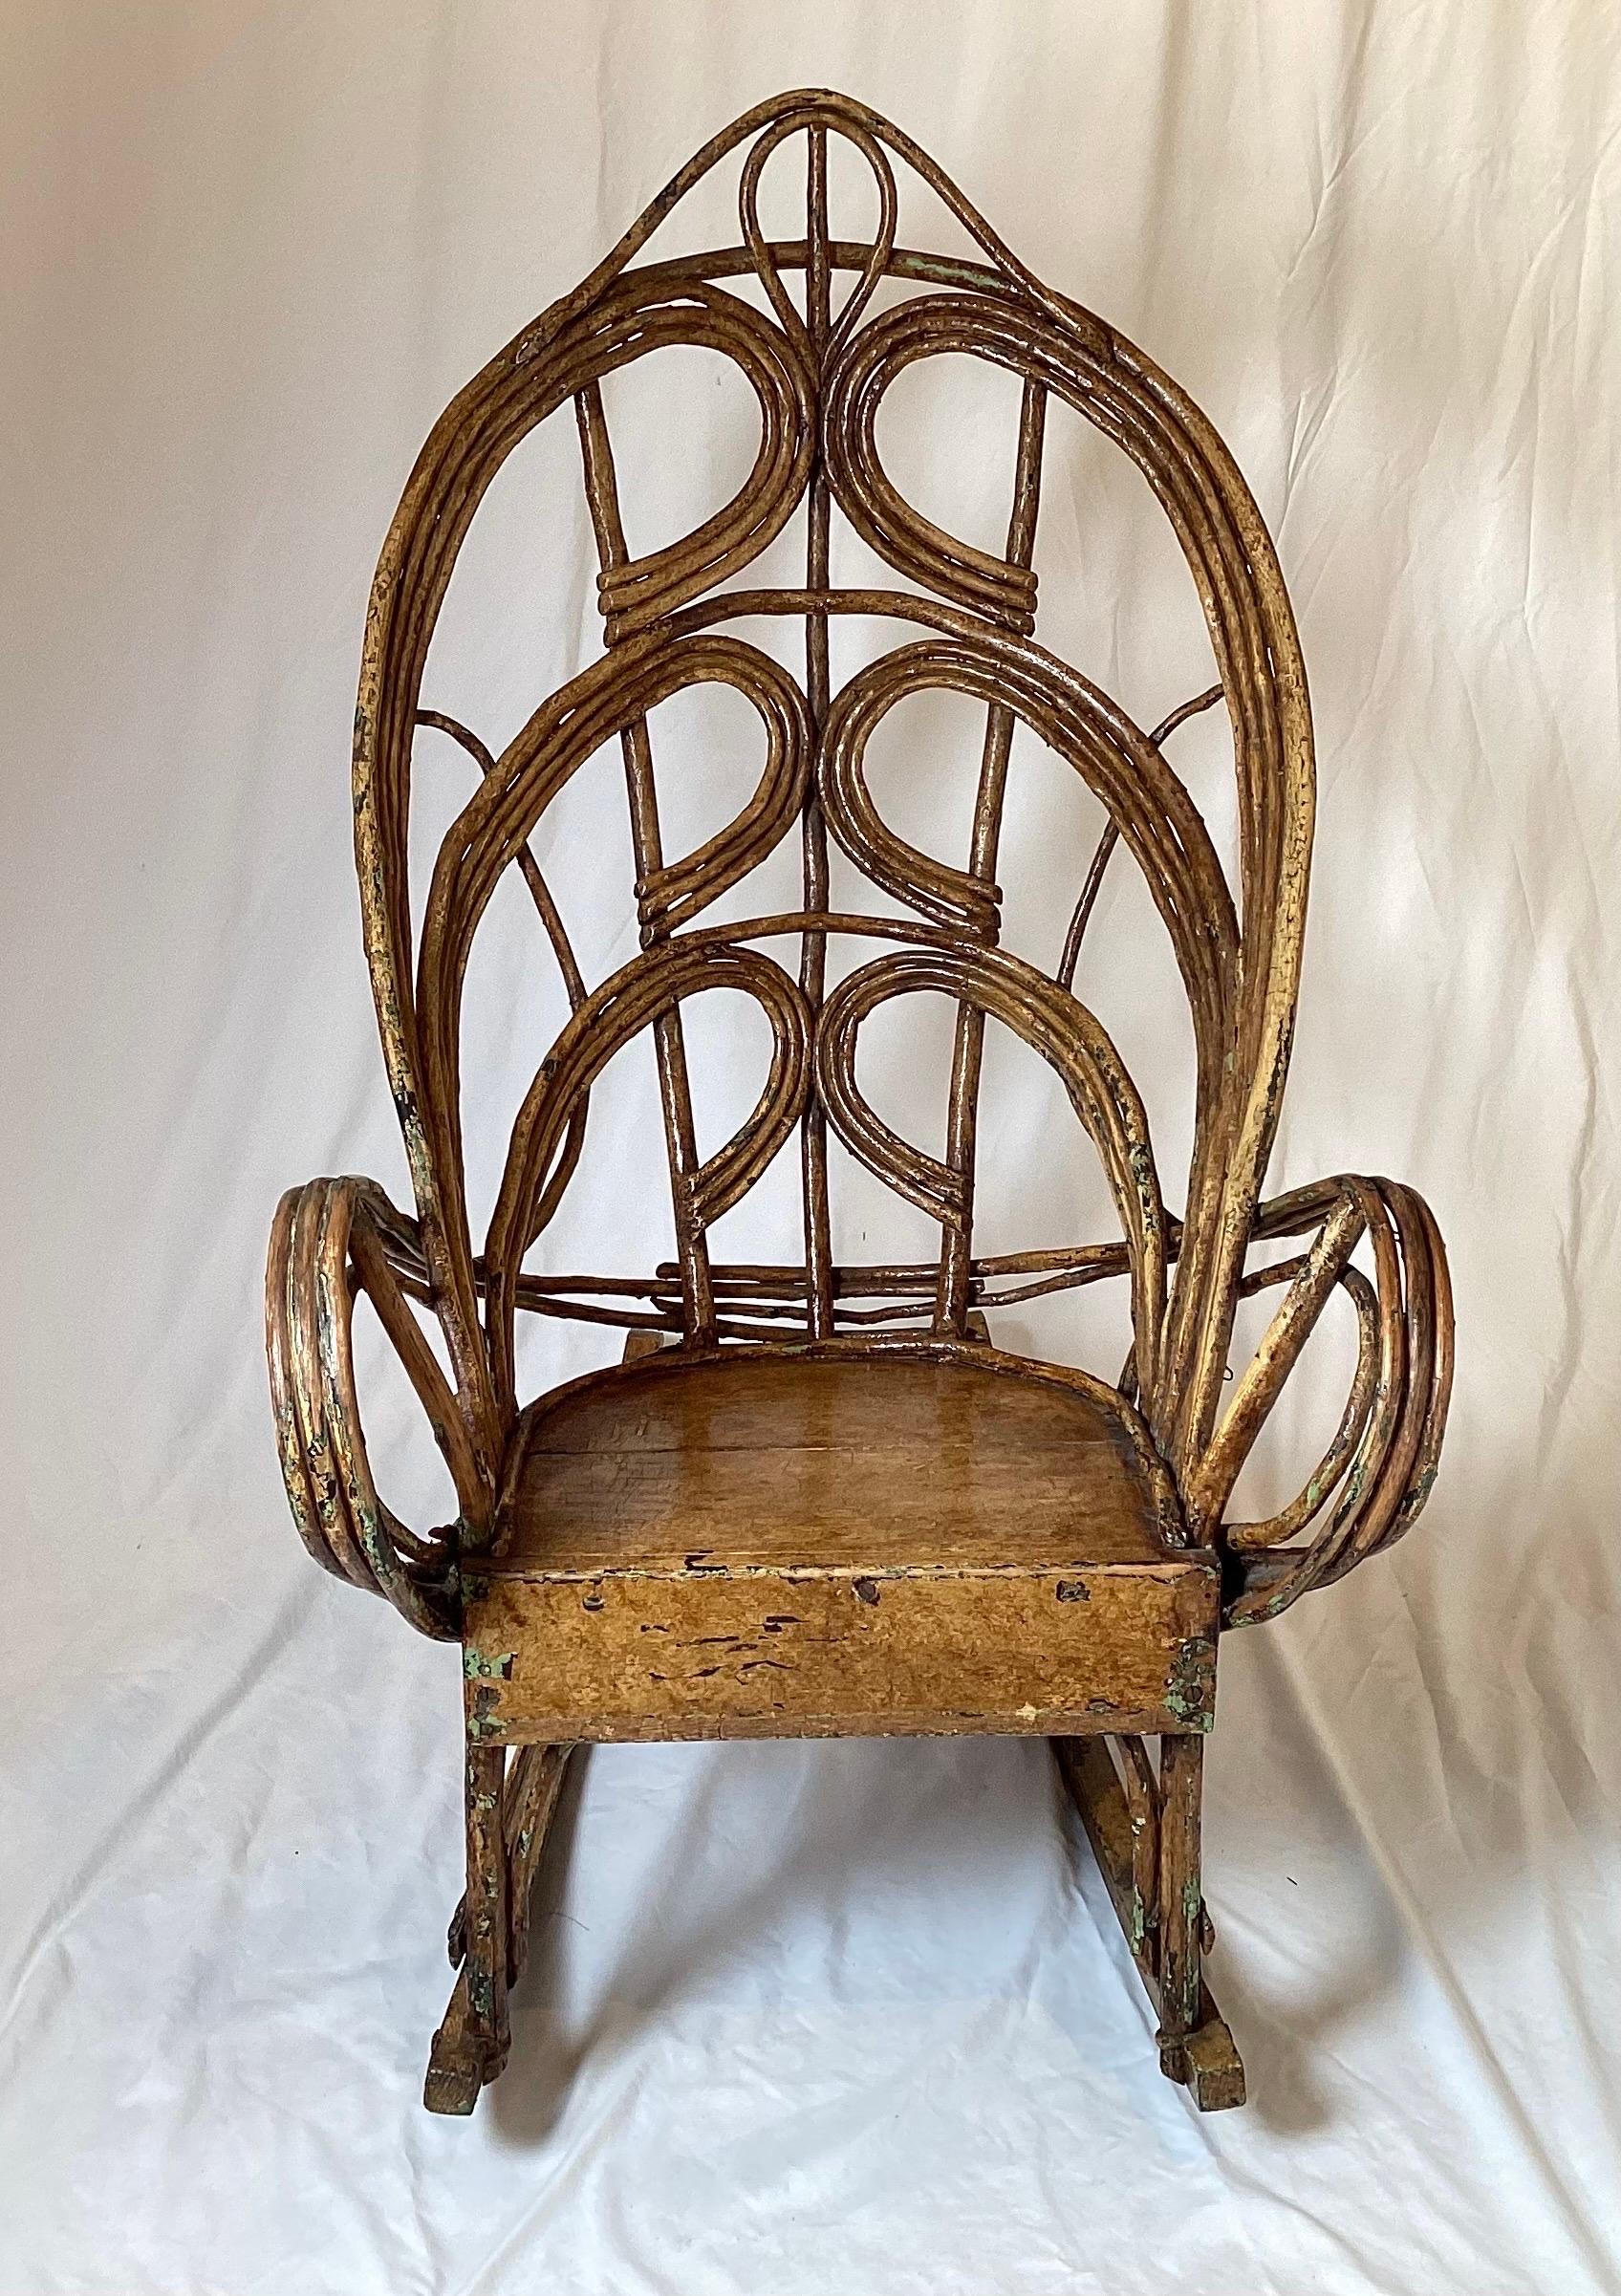 A hand made willow branch Adirondack rocking chair with layers of old paint. The rocker with bands of willow branches shaped to form the back, arms and frame with flat wood panels for the seat. The overall color is amber with hints of earlier green